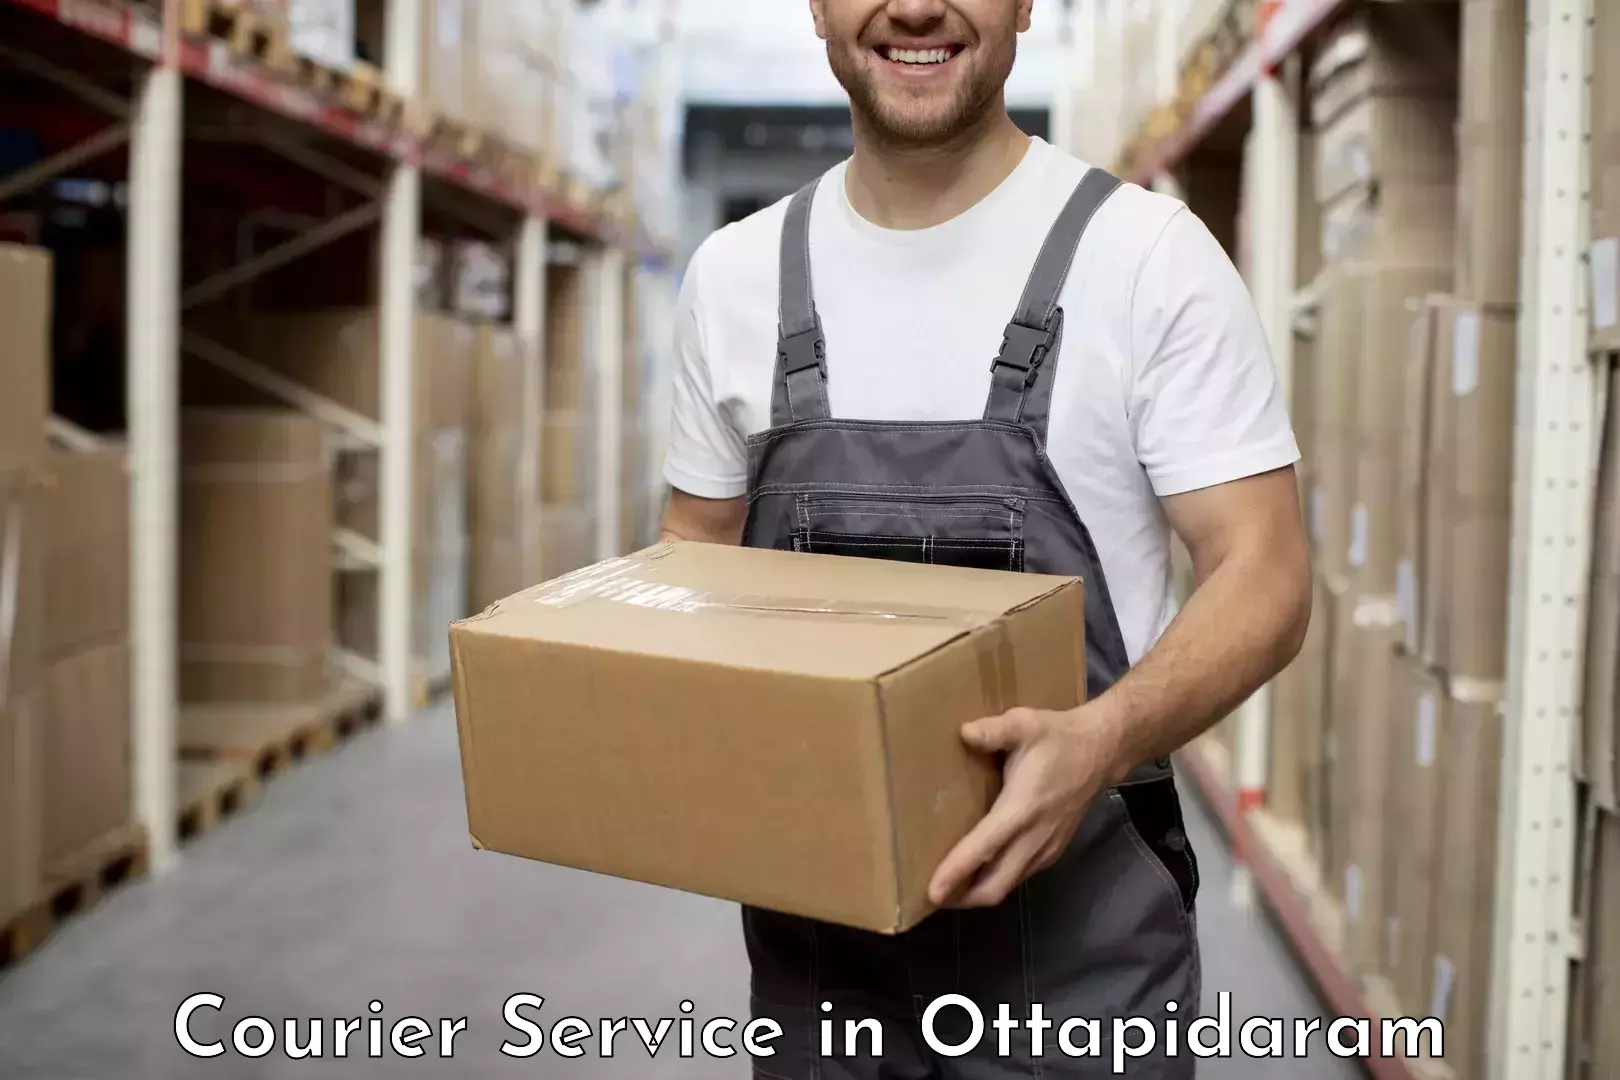 Personalized courier experiences in Ottapidaram